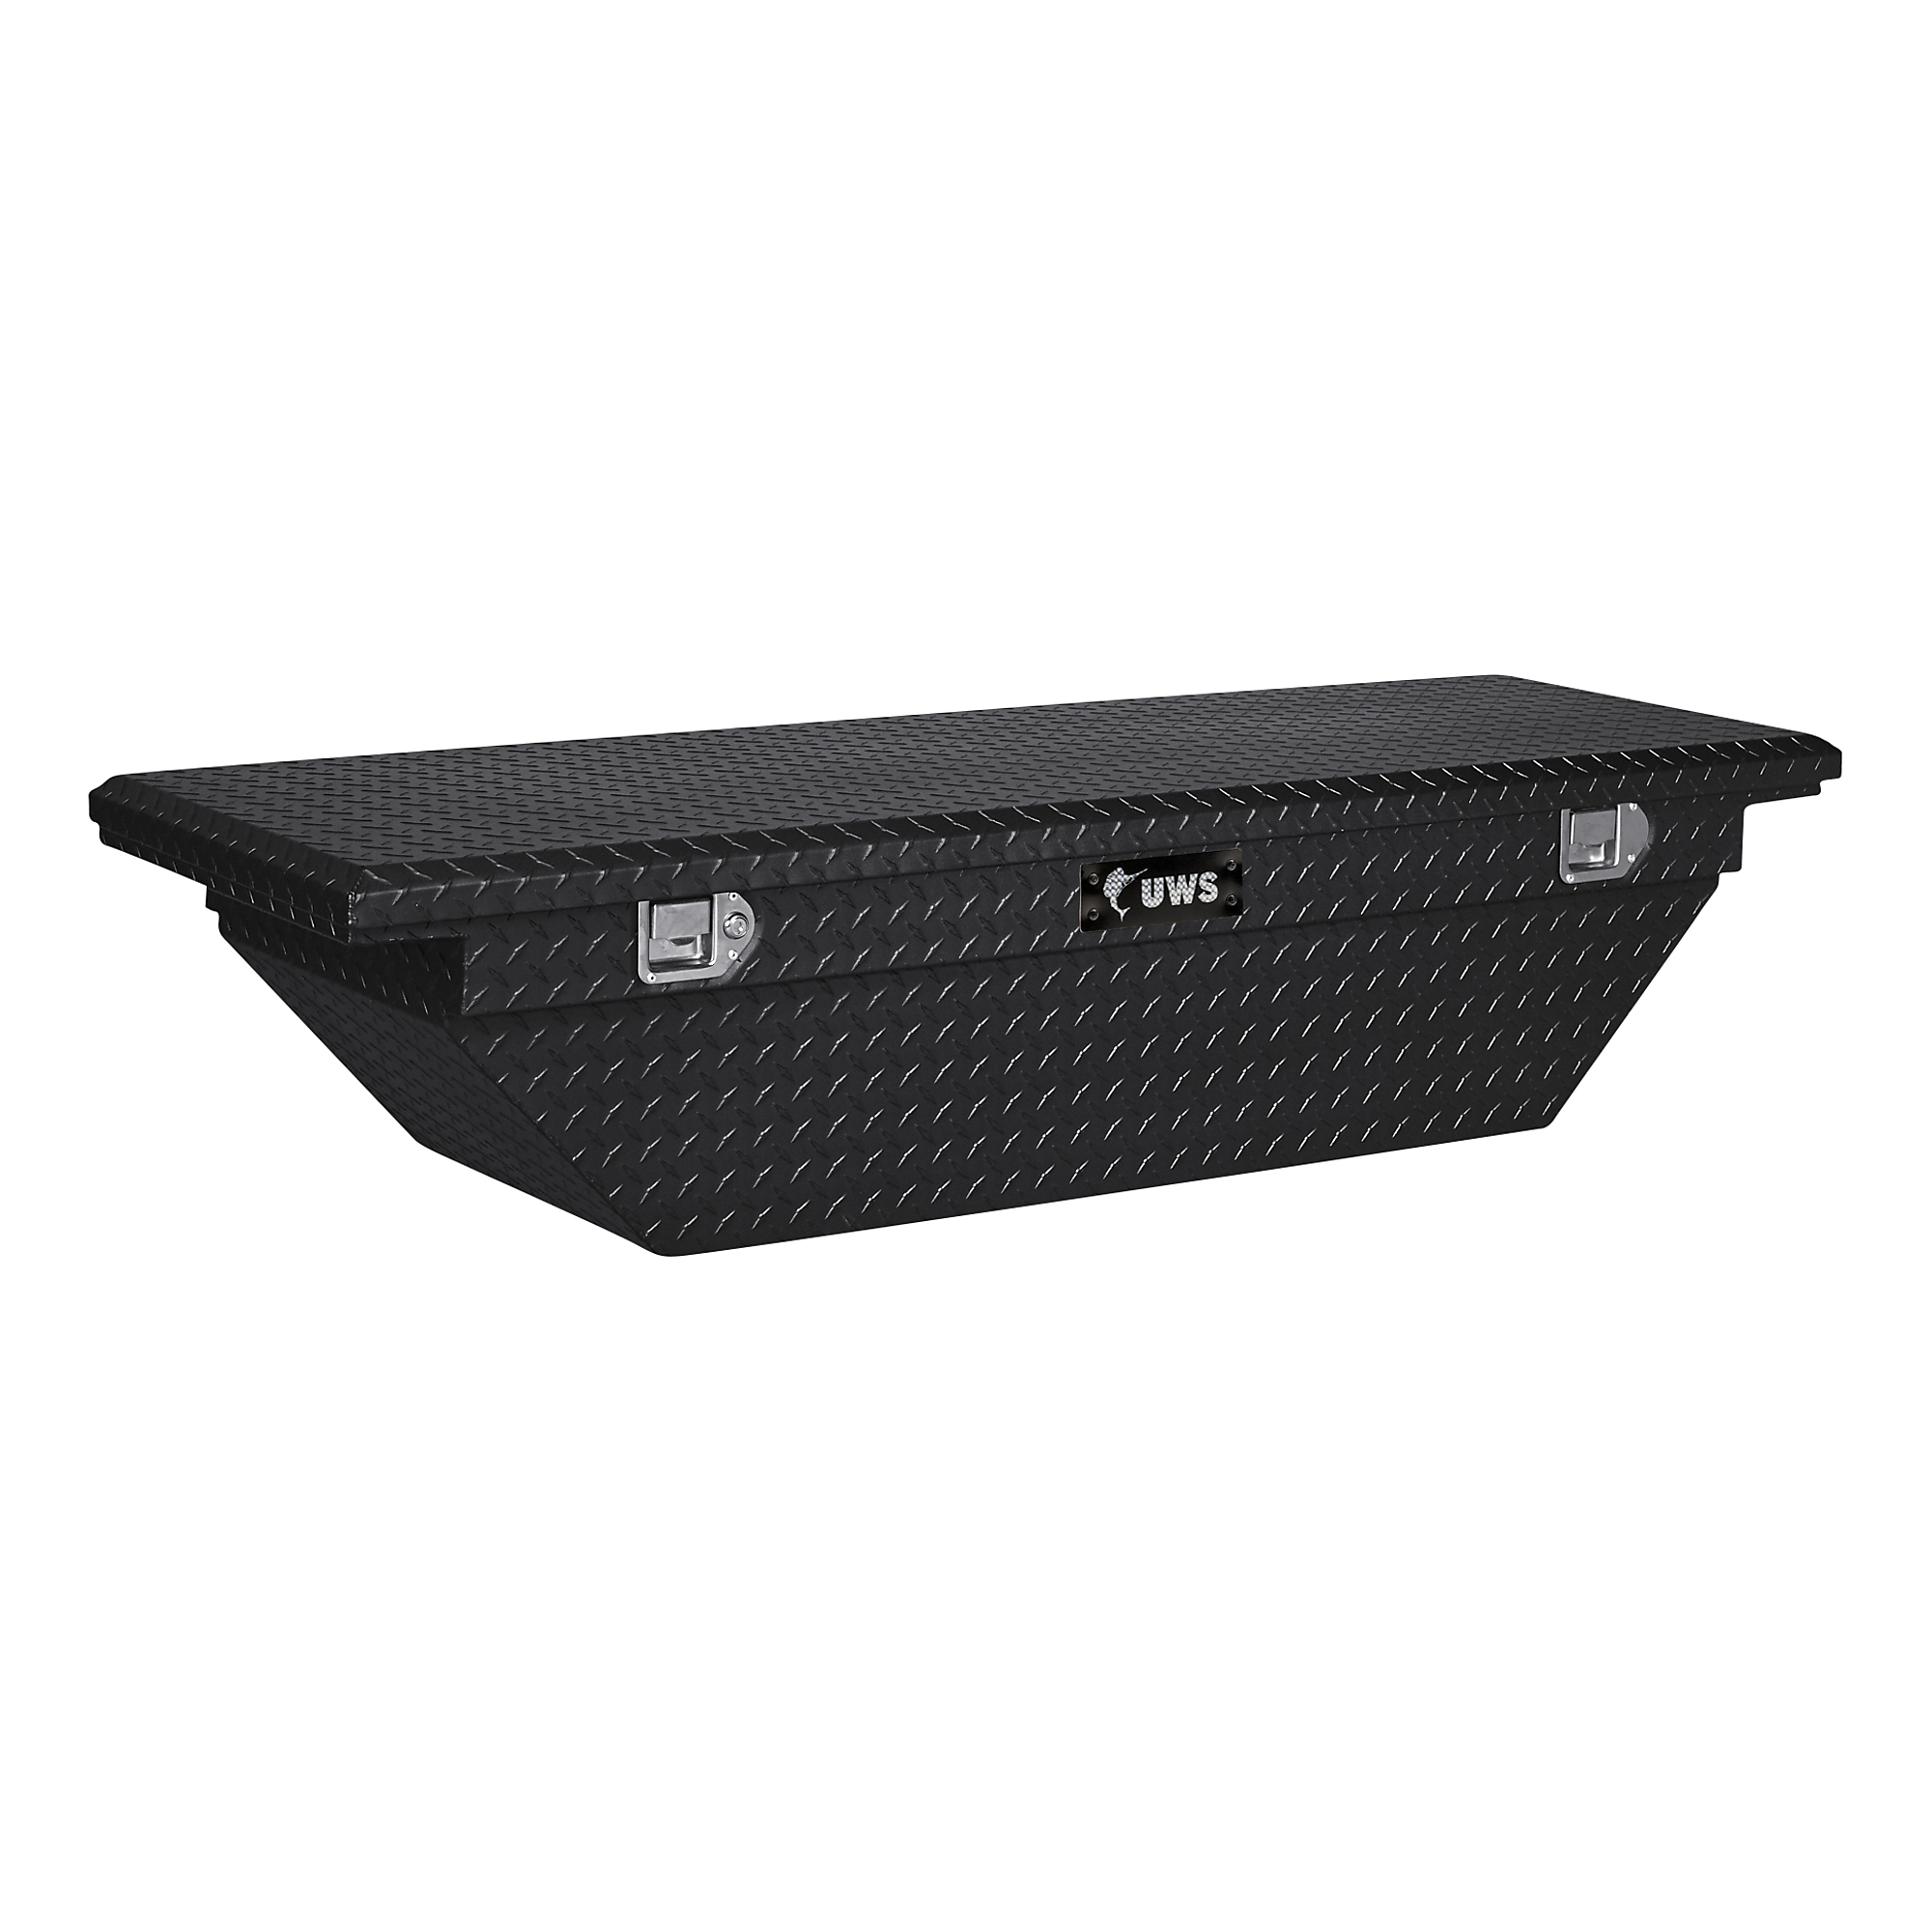 UWS, 60Inch Angled Crossover Truck Tool Box, Width 60.875 in, Material Aluminum, Color Finish Gloss Black, Model EC10202